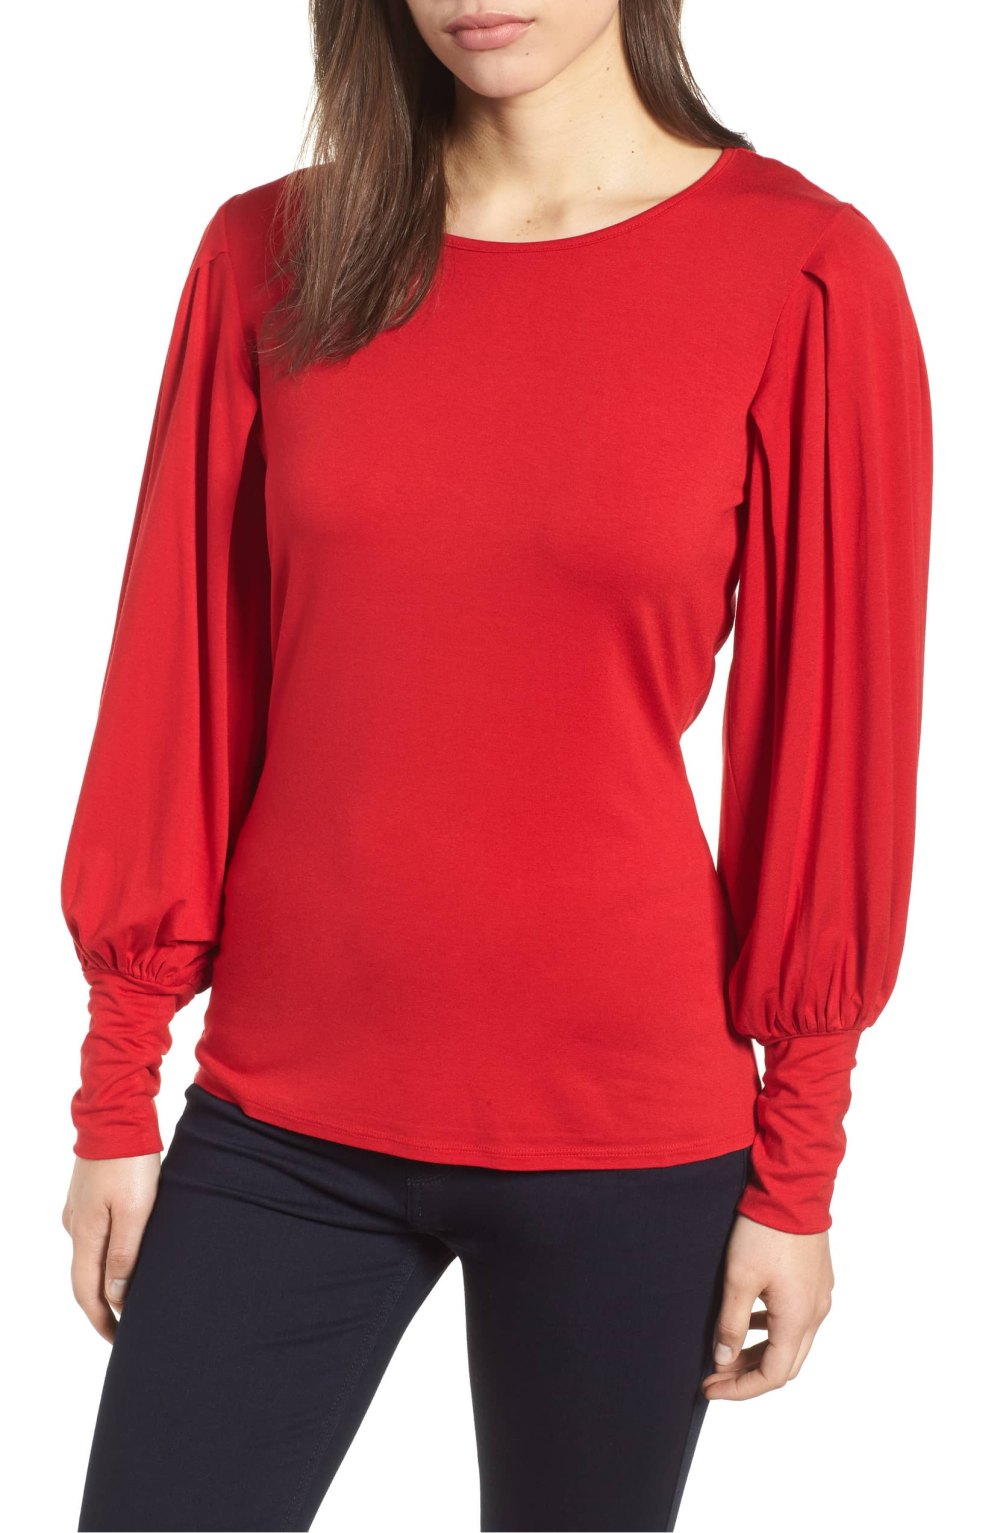 Shop This Vince Camuto Bubble Sleeve Top on Sale at Nordstrom | Us Weekly